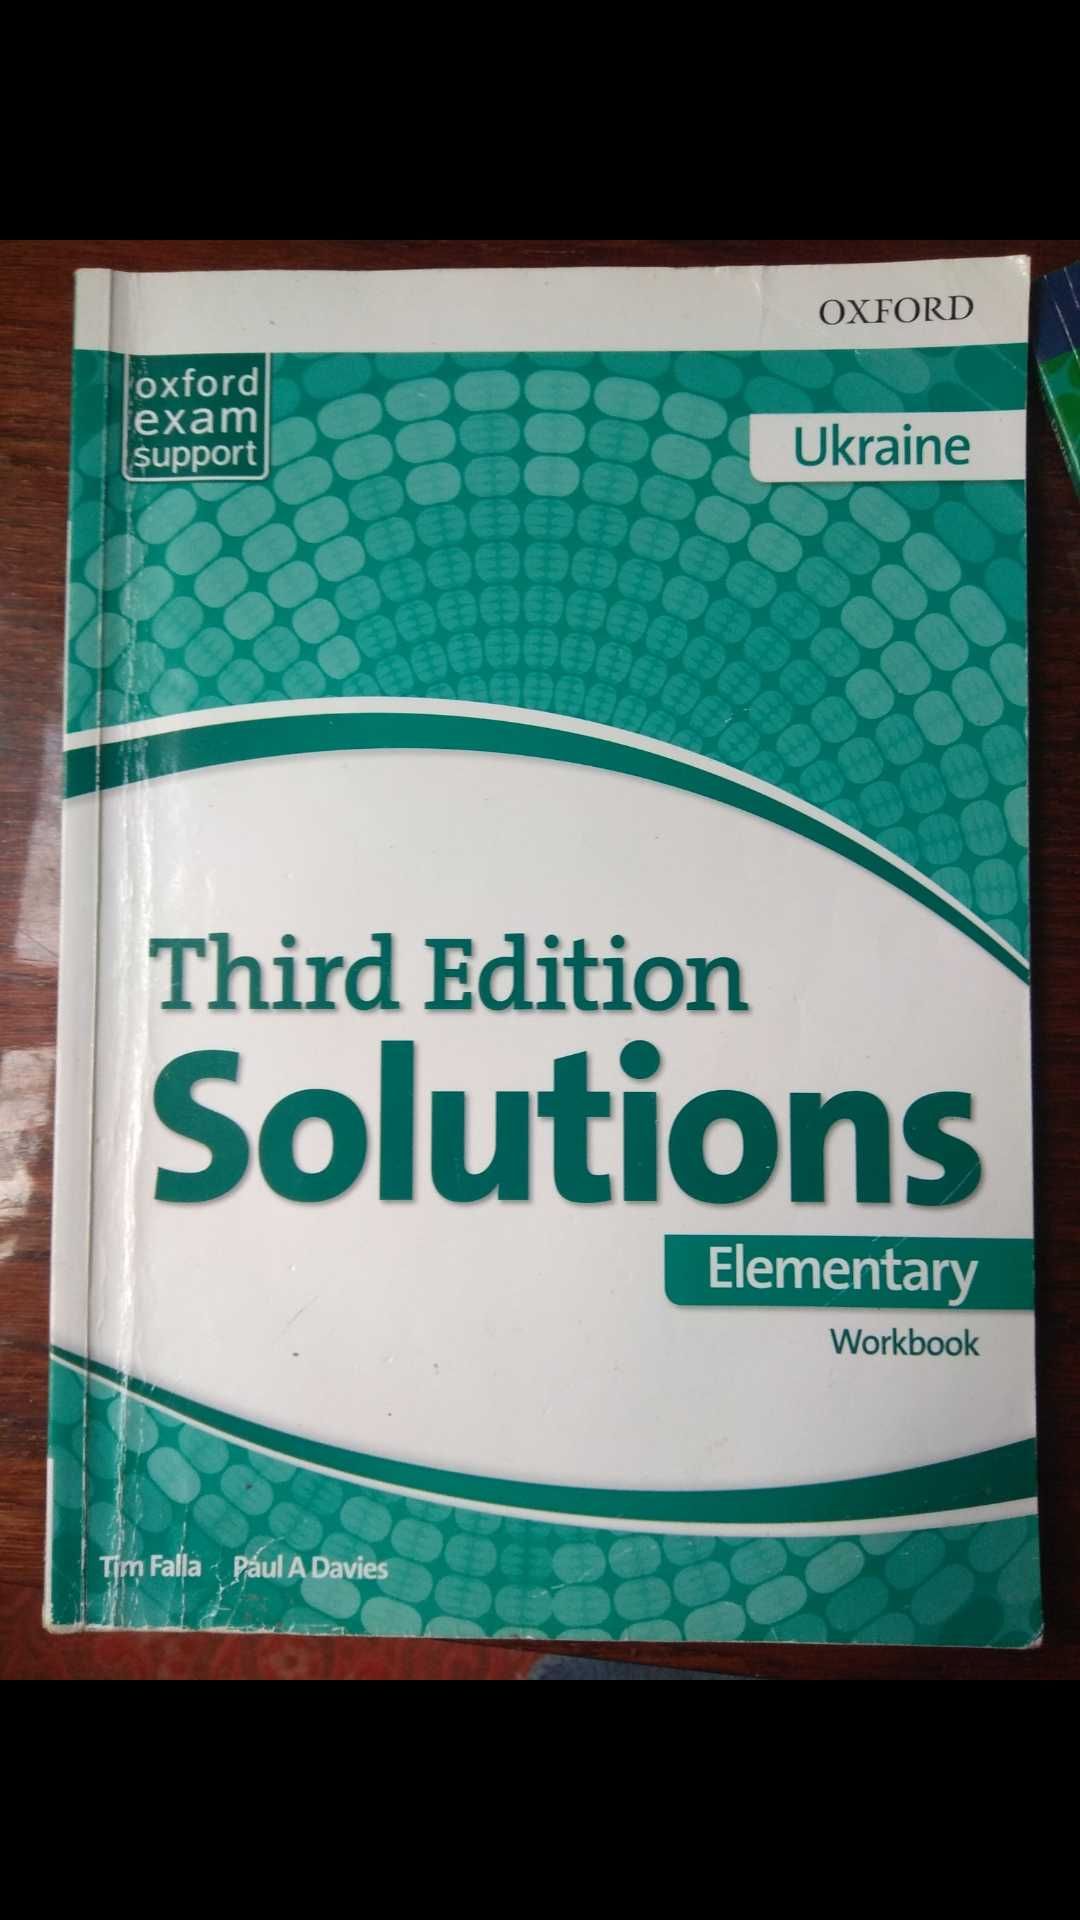 Third edition Solutions (Elementary)